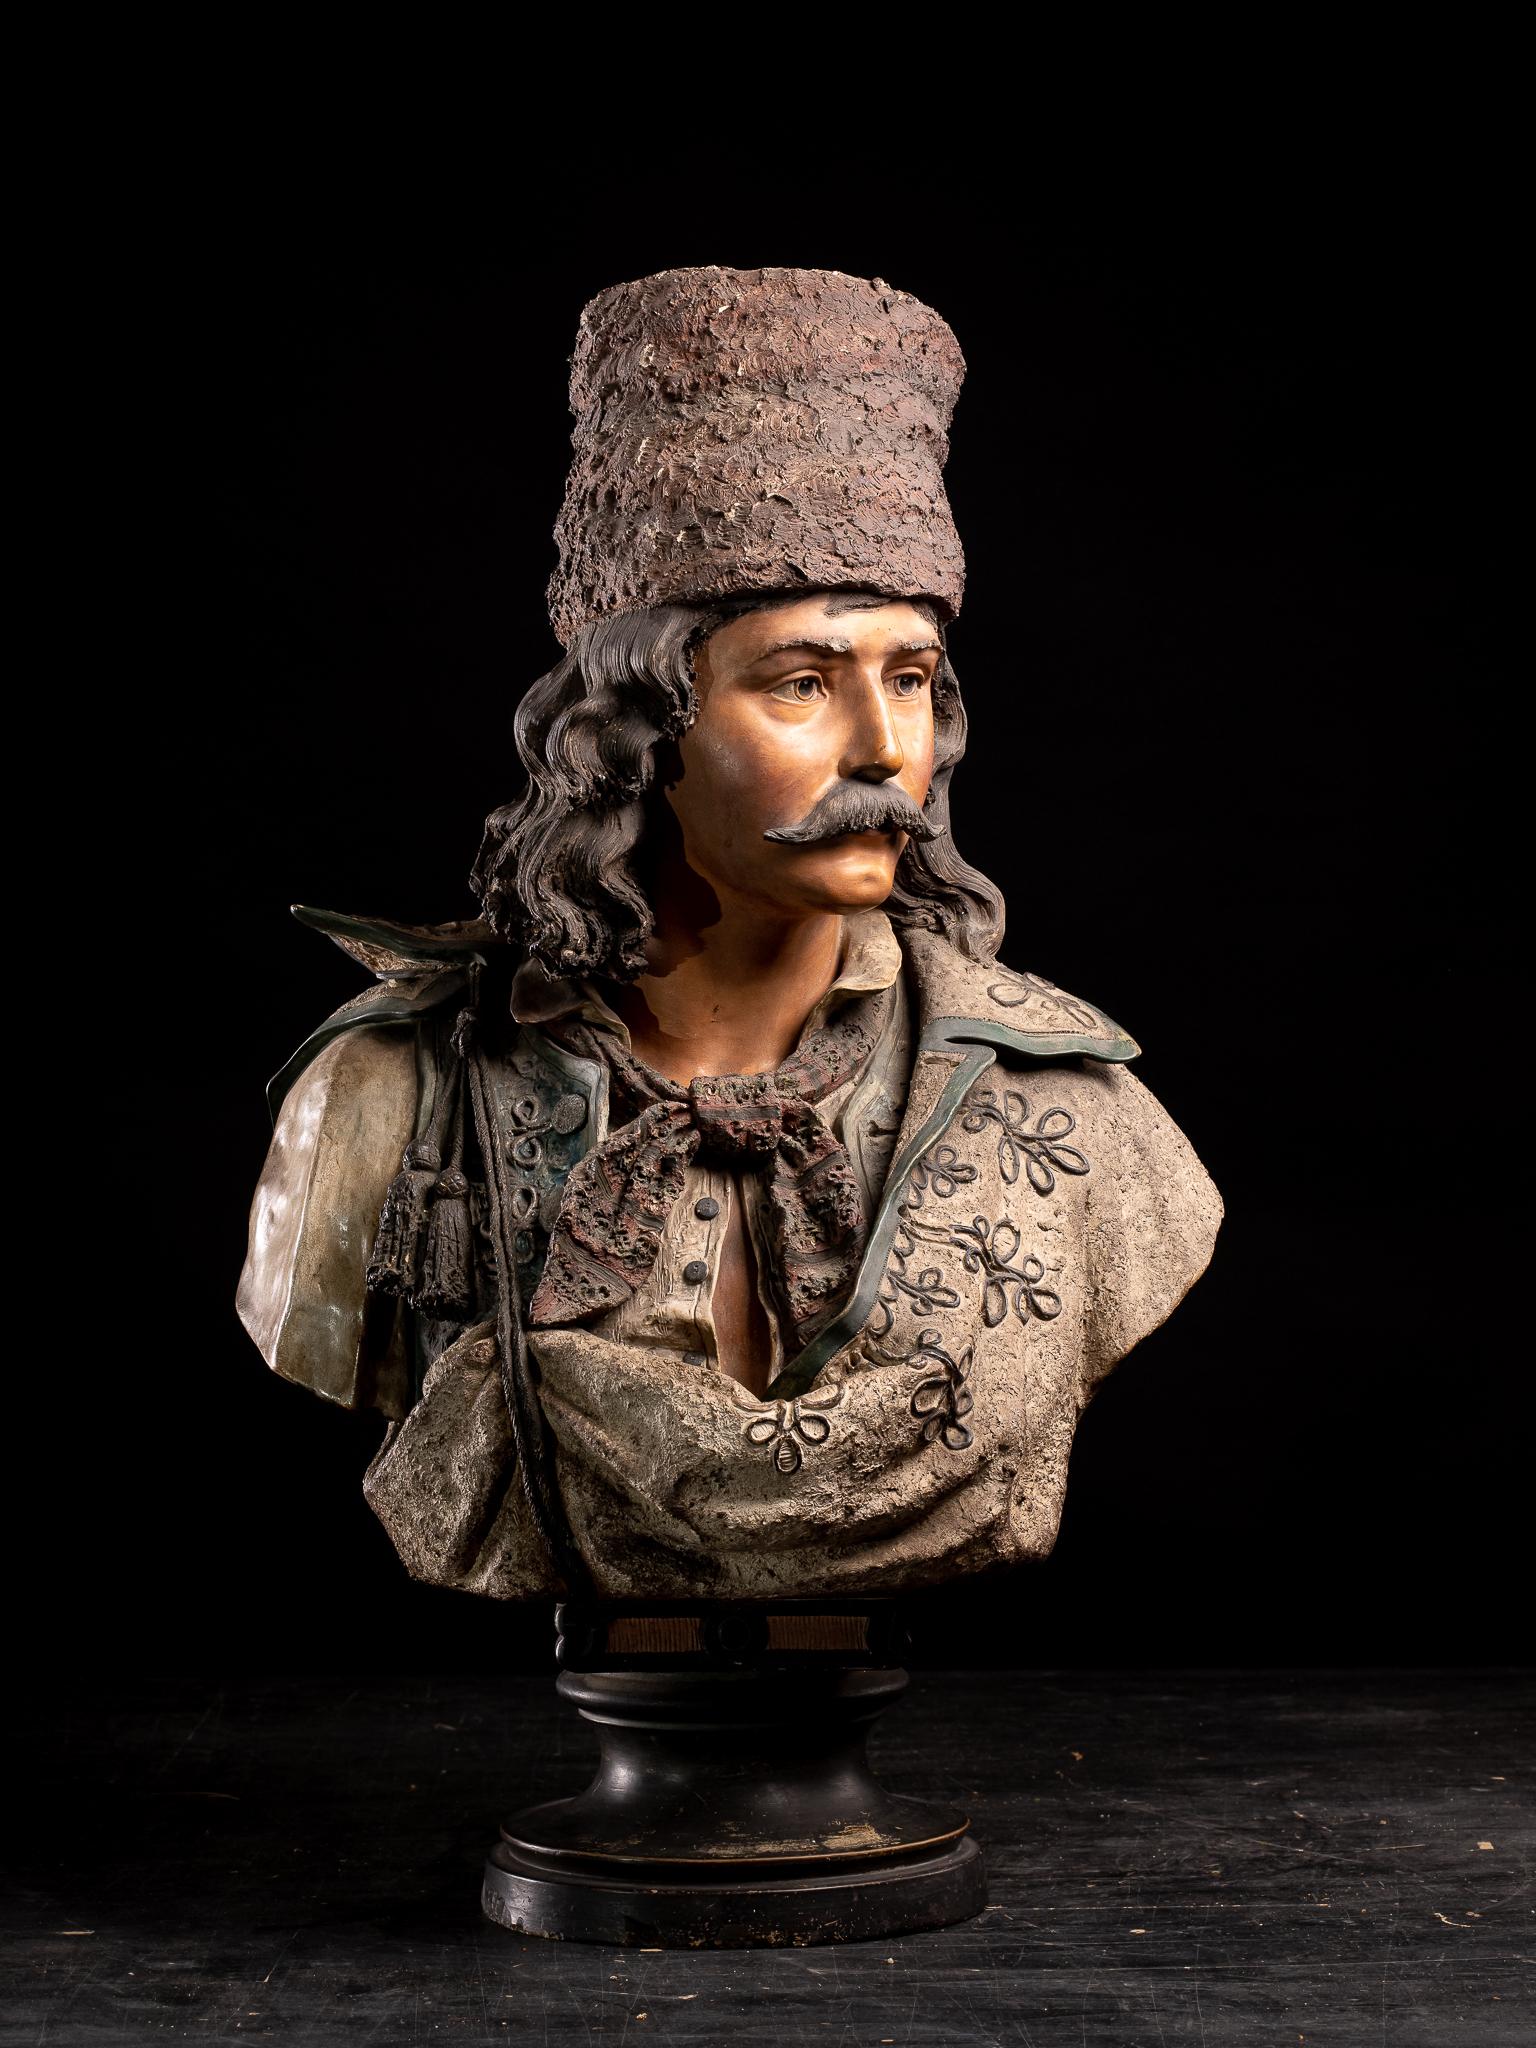 Polychromed statue of Russian Dandy.